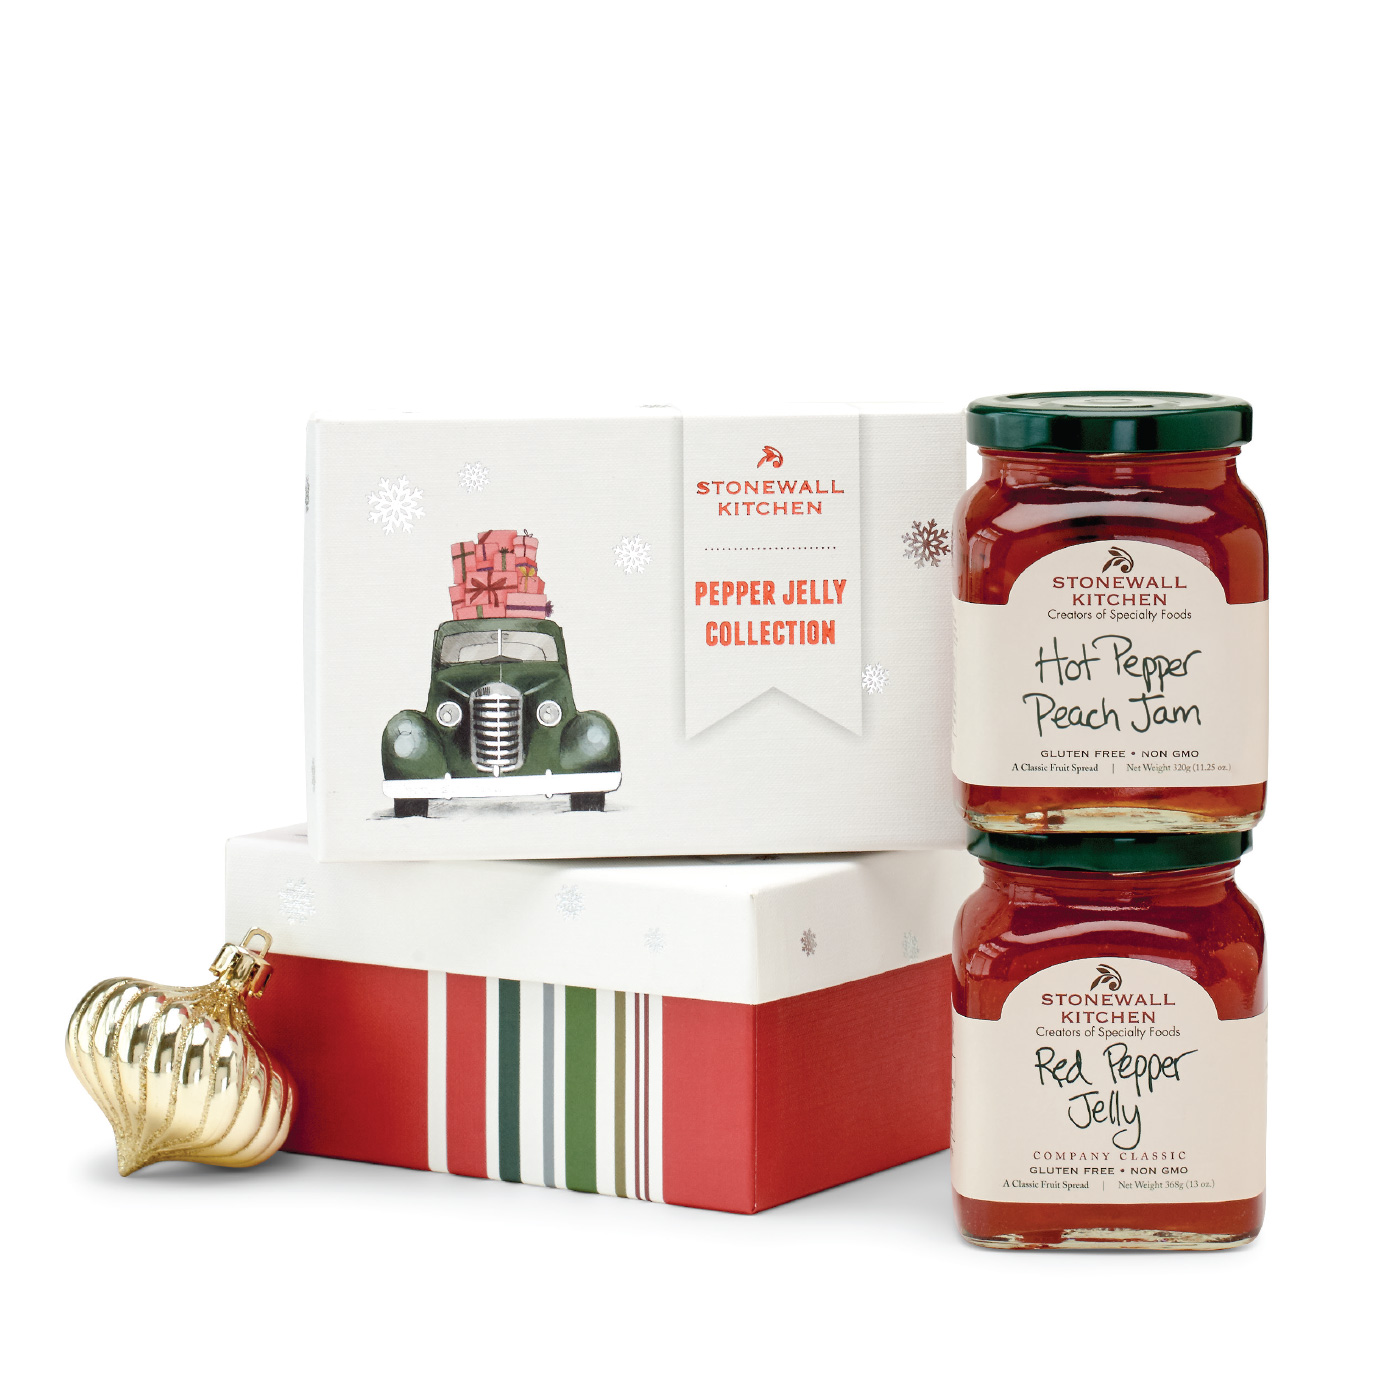 Stonewall Kitchen 2017 Holiday Pepper Jelly Gift Pack